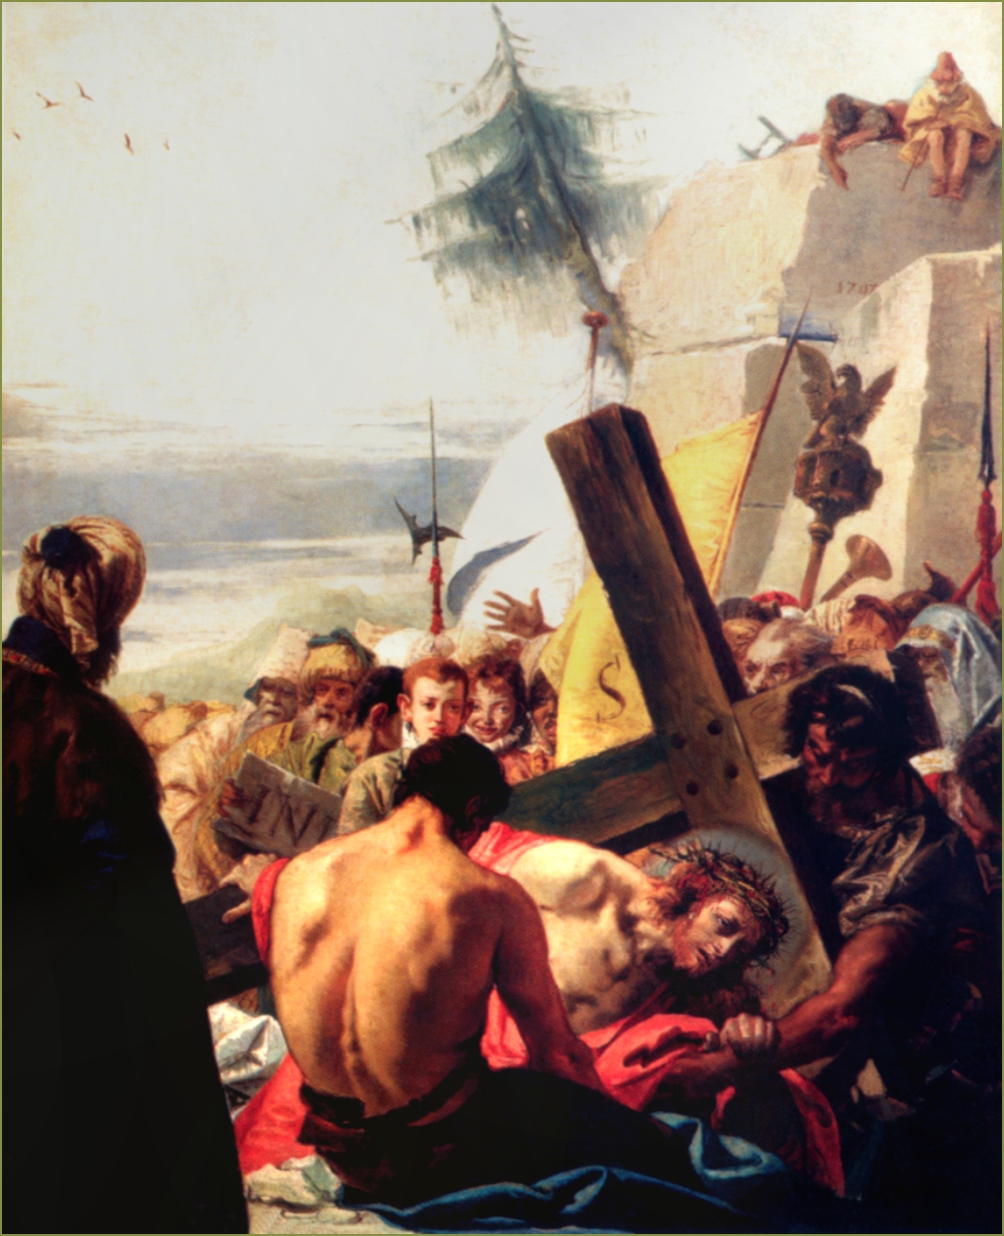 TIEPOLO'S NINTH STATION OF THE CROSS